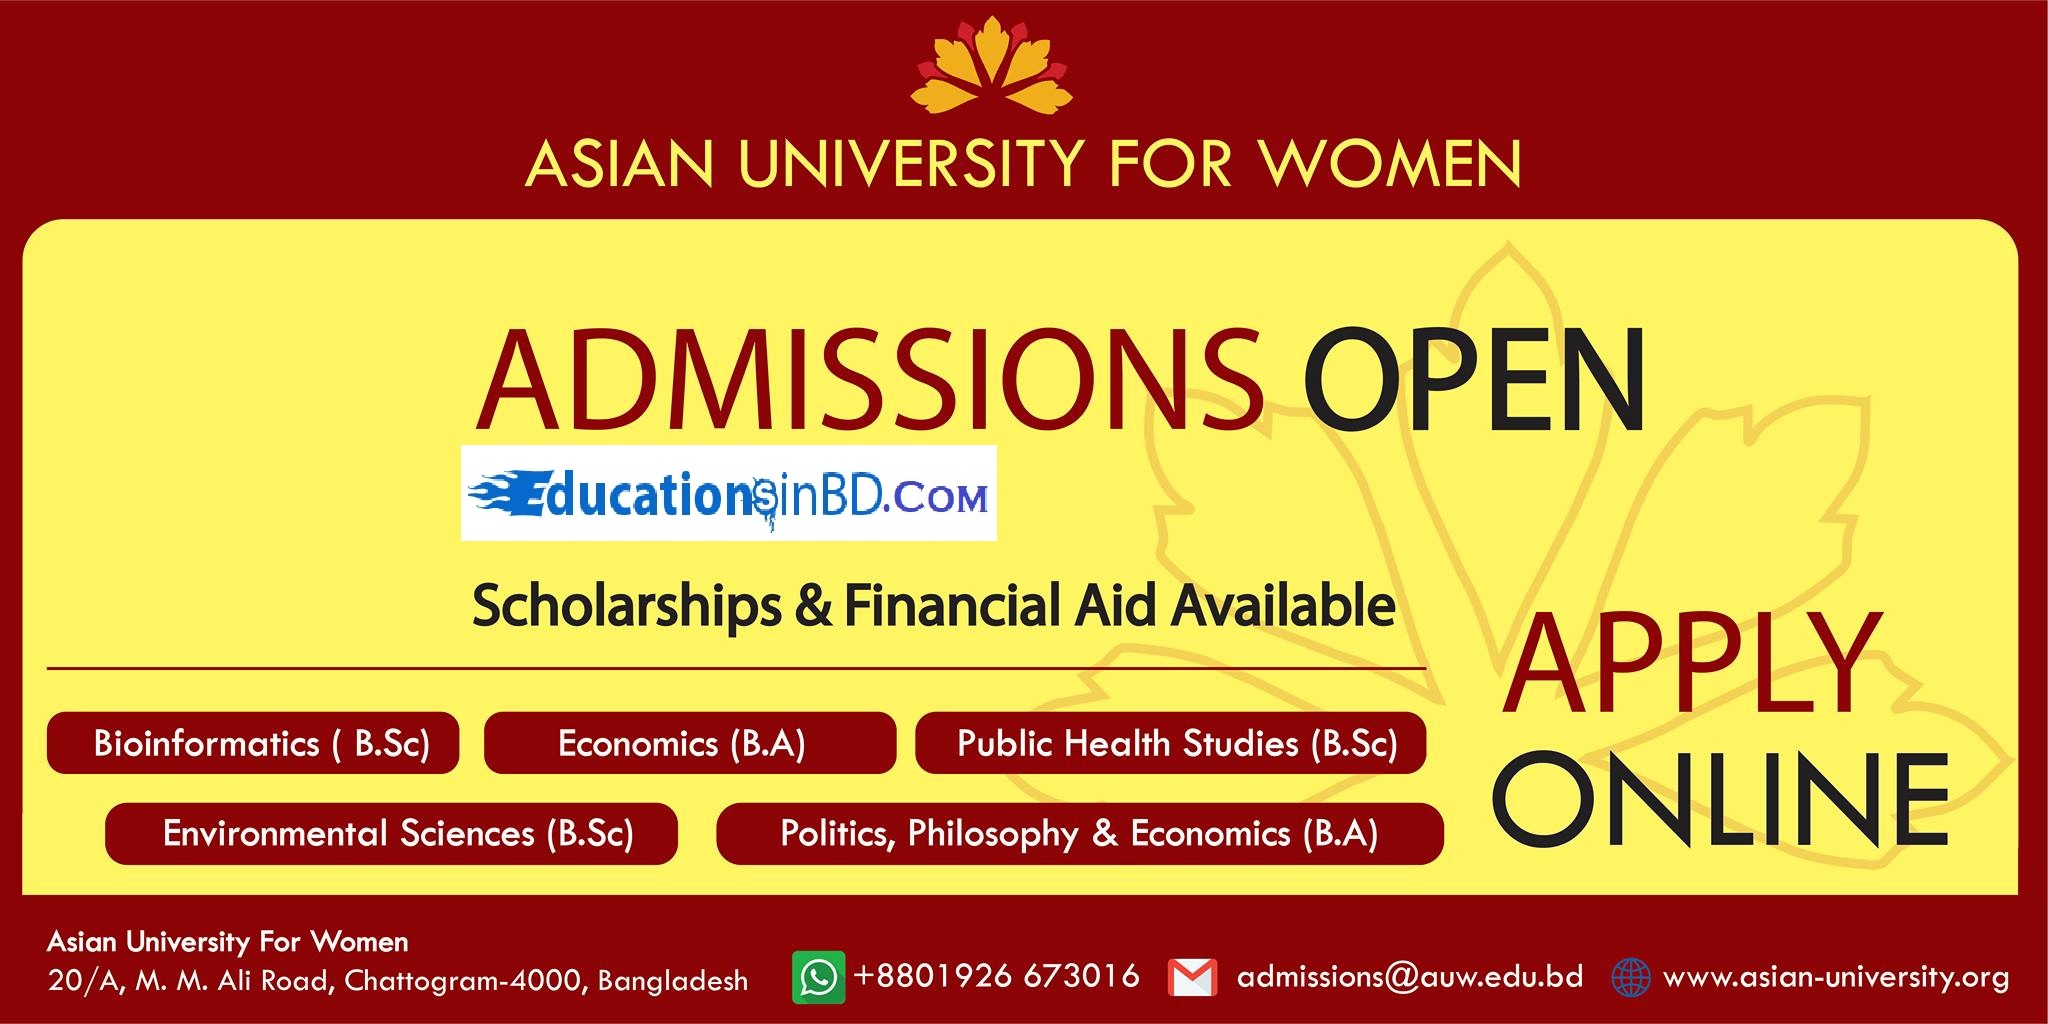 south asian university phd admission 2019